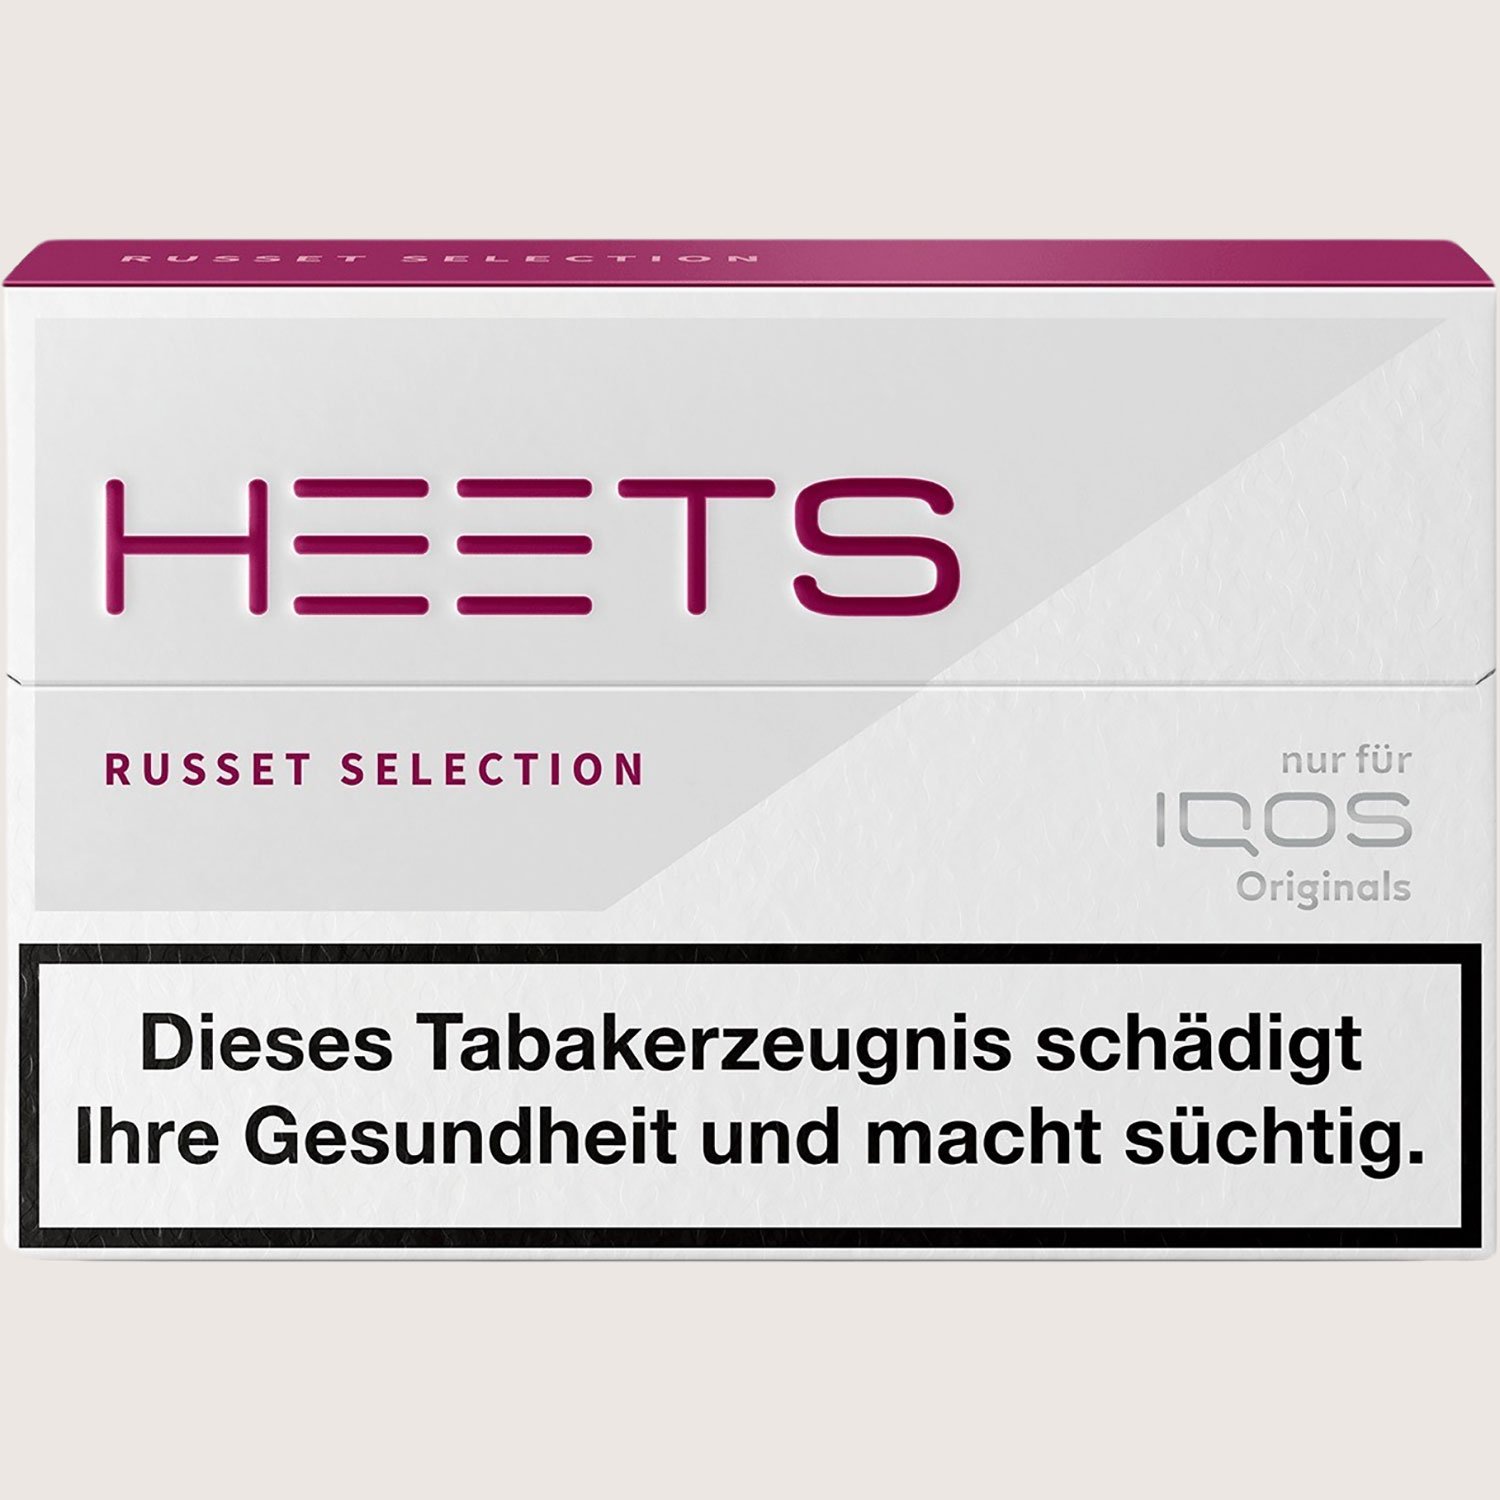 IQOS HEETS Russet Selection